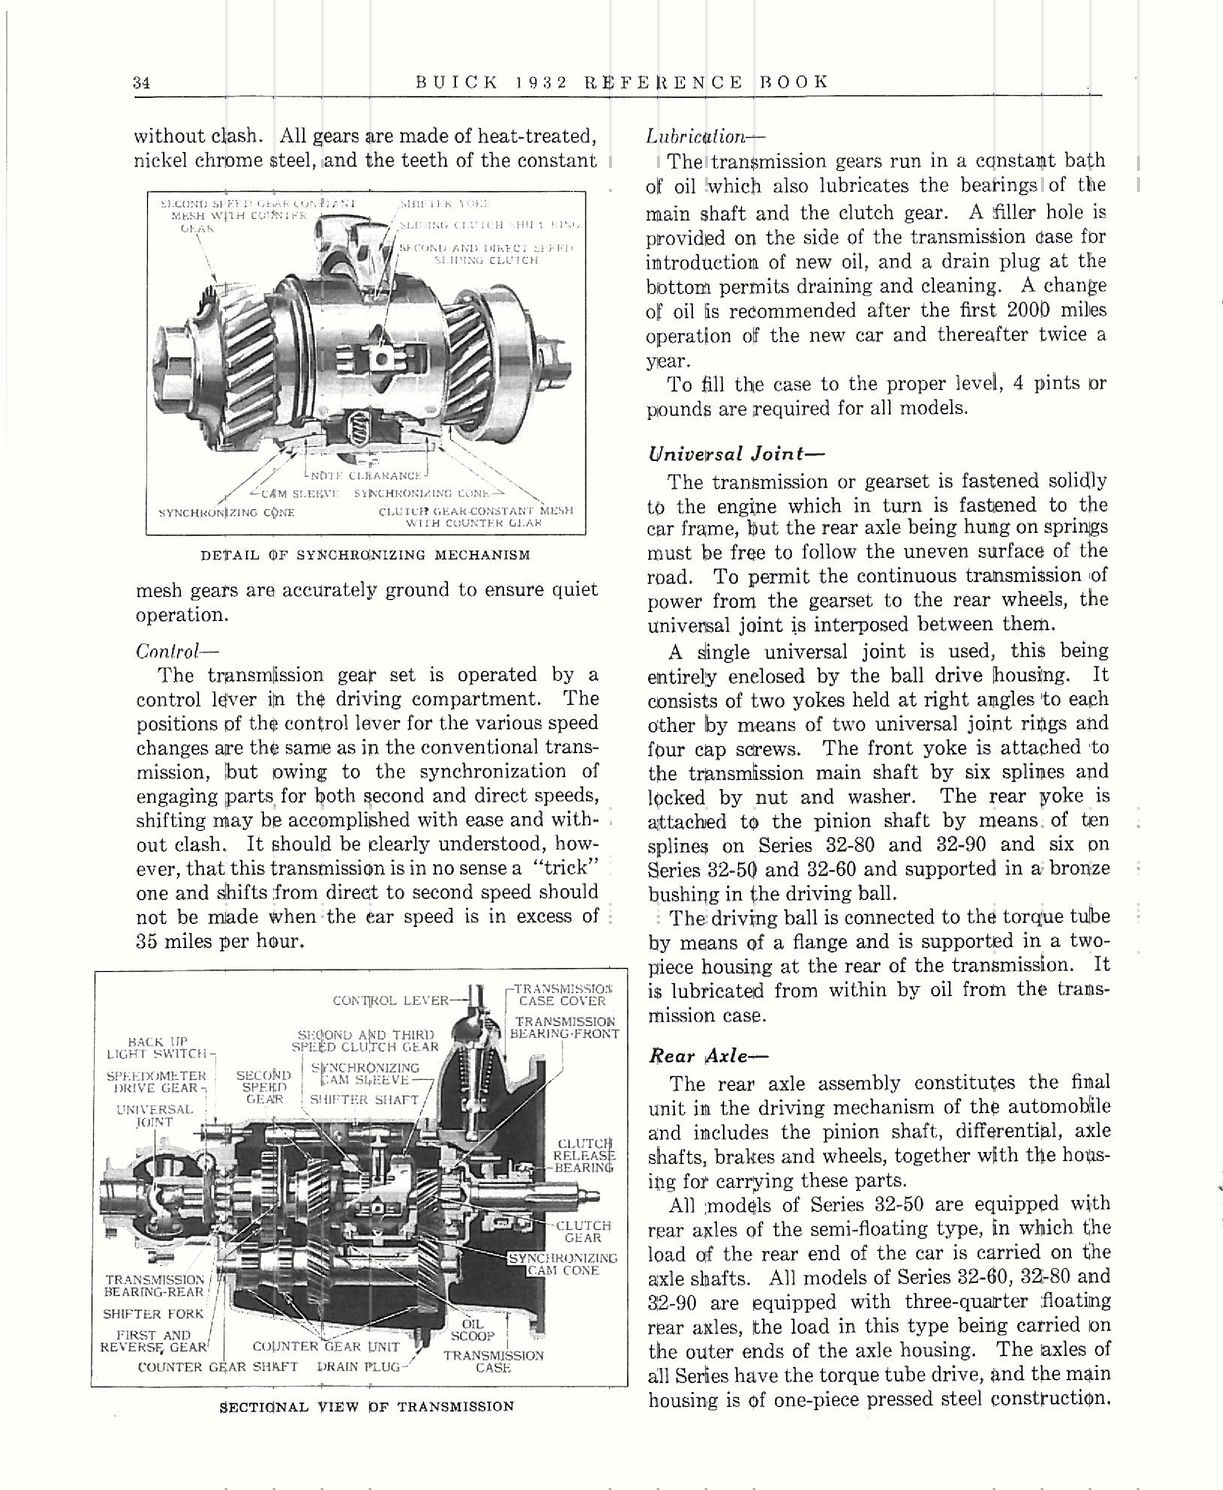 n_1932 Buick Reference Book-34.jpg